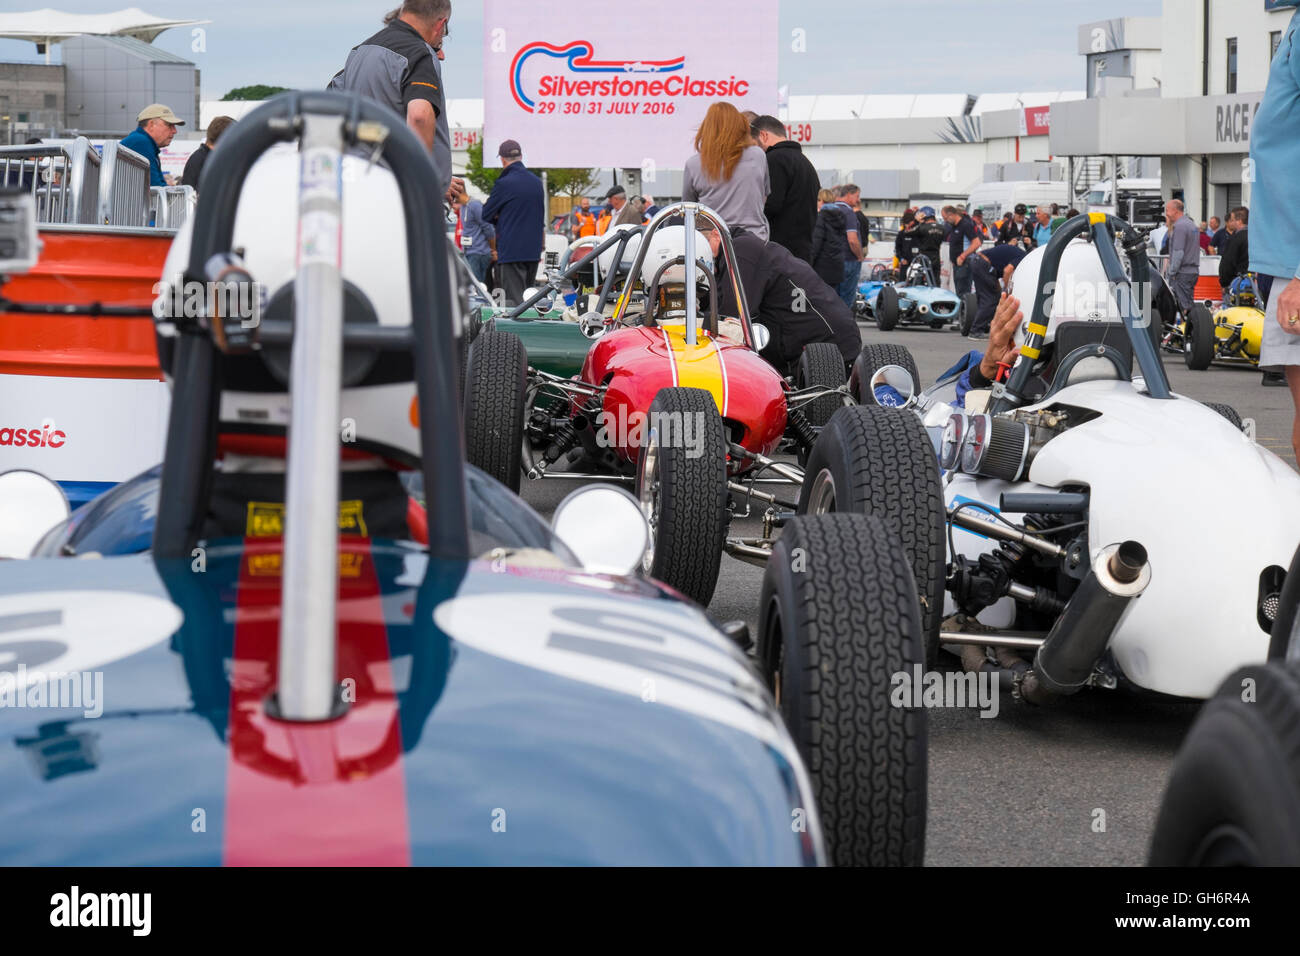 Formula Junior racing cars lined up in the paddock at the 2016 Silverstone Classic event, England, UK Stock Photo